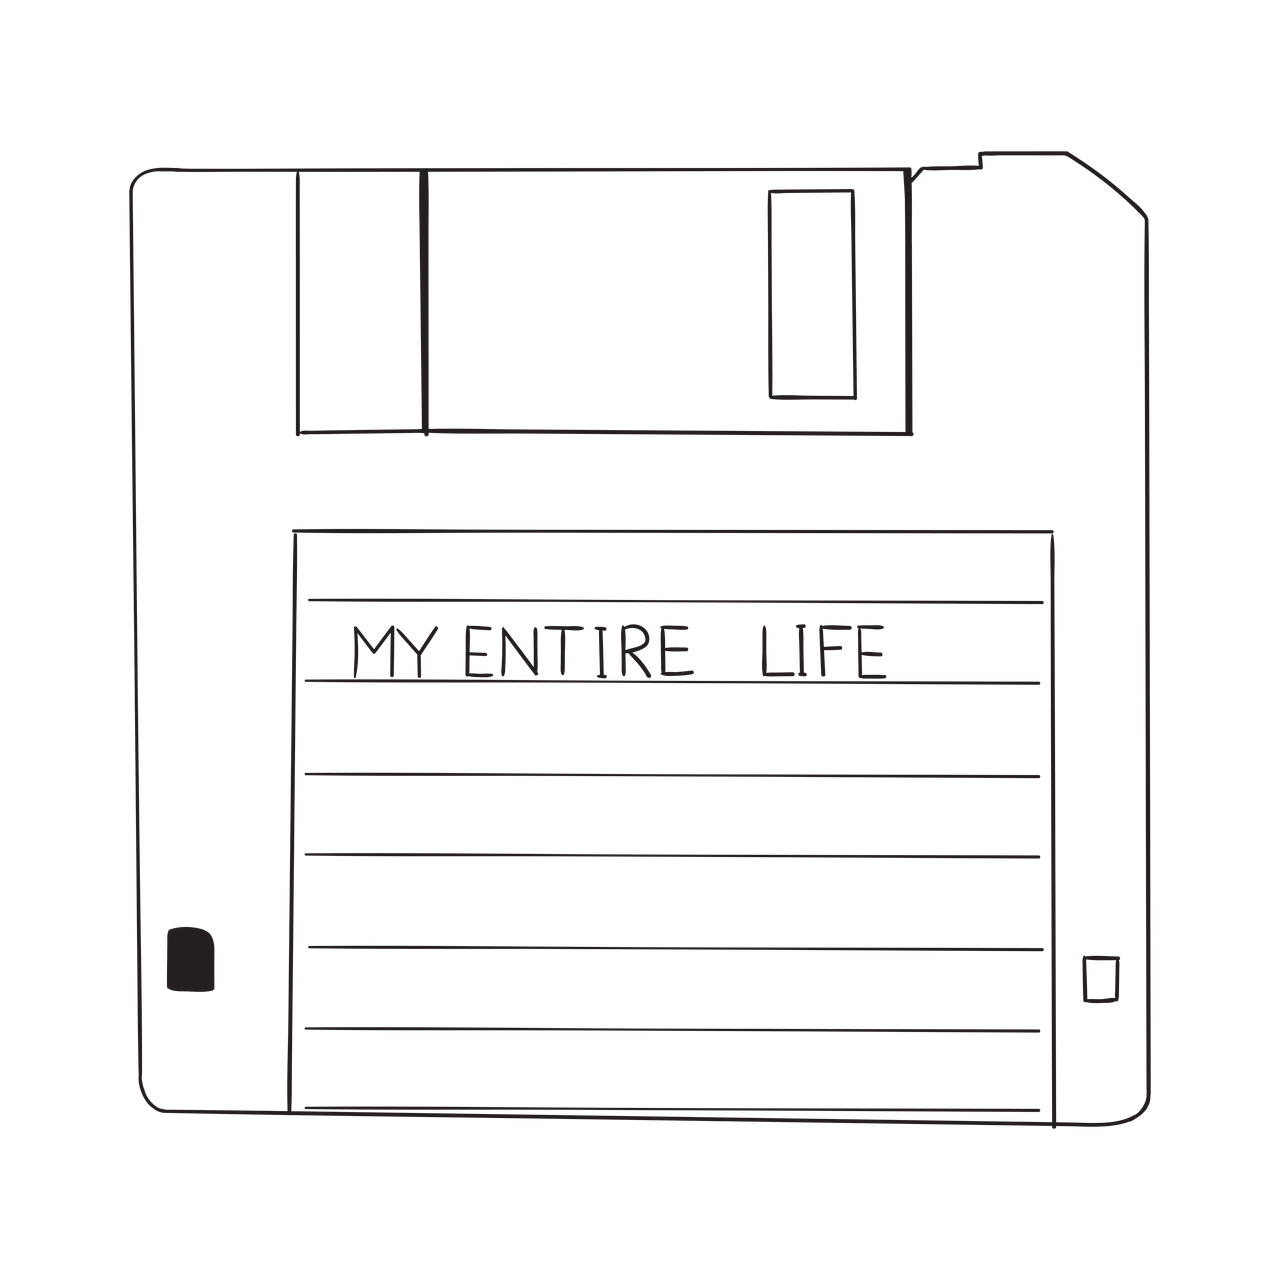 a floppy disk with the words my entire life written on it, an album cover, by Andrei Kolkoutine, tumblr, computer art, black backround. inkscape, full of details, kaethe butcher, i've discovered life